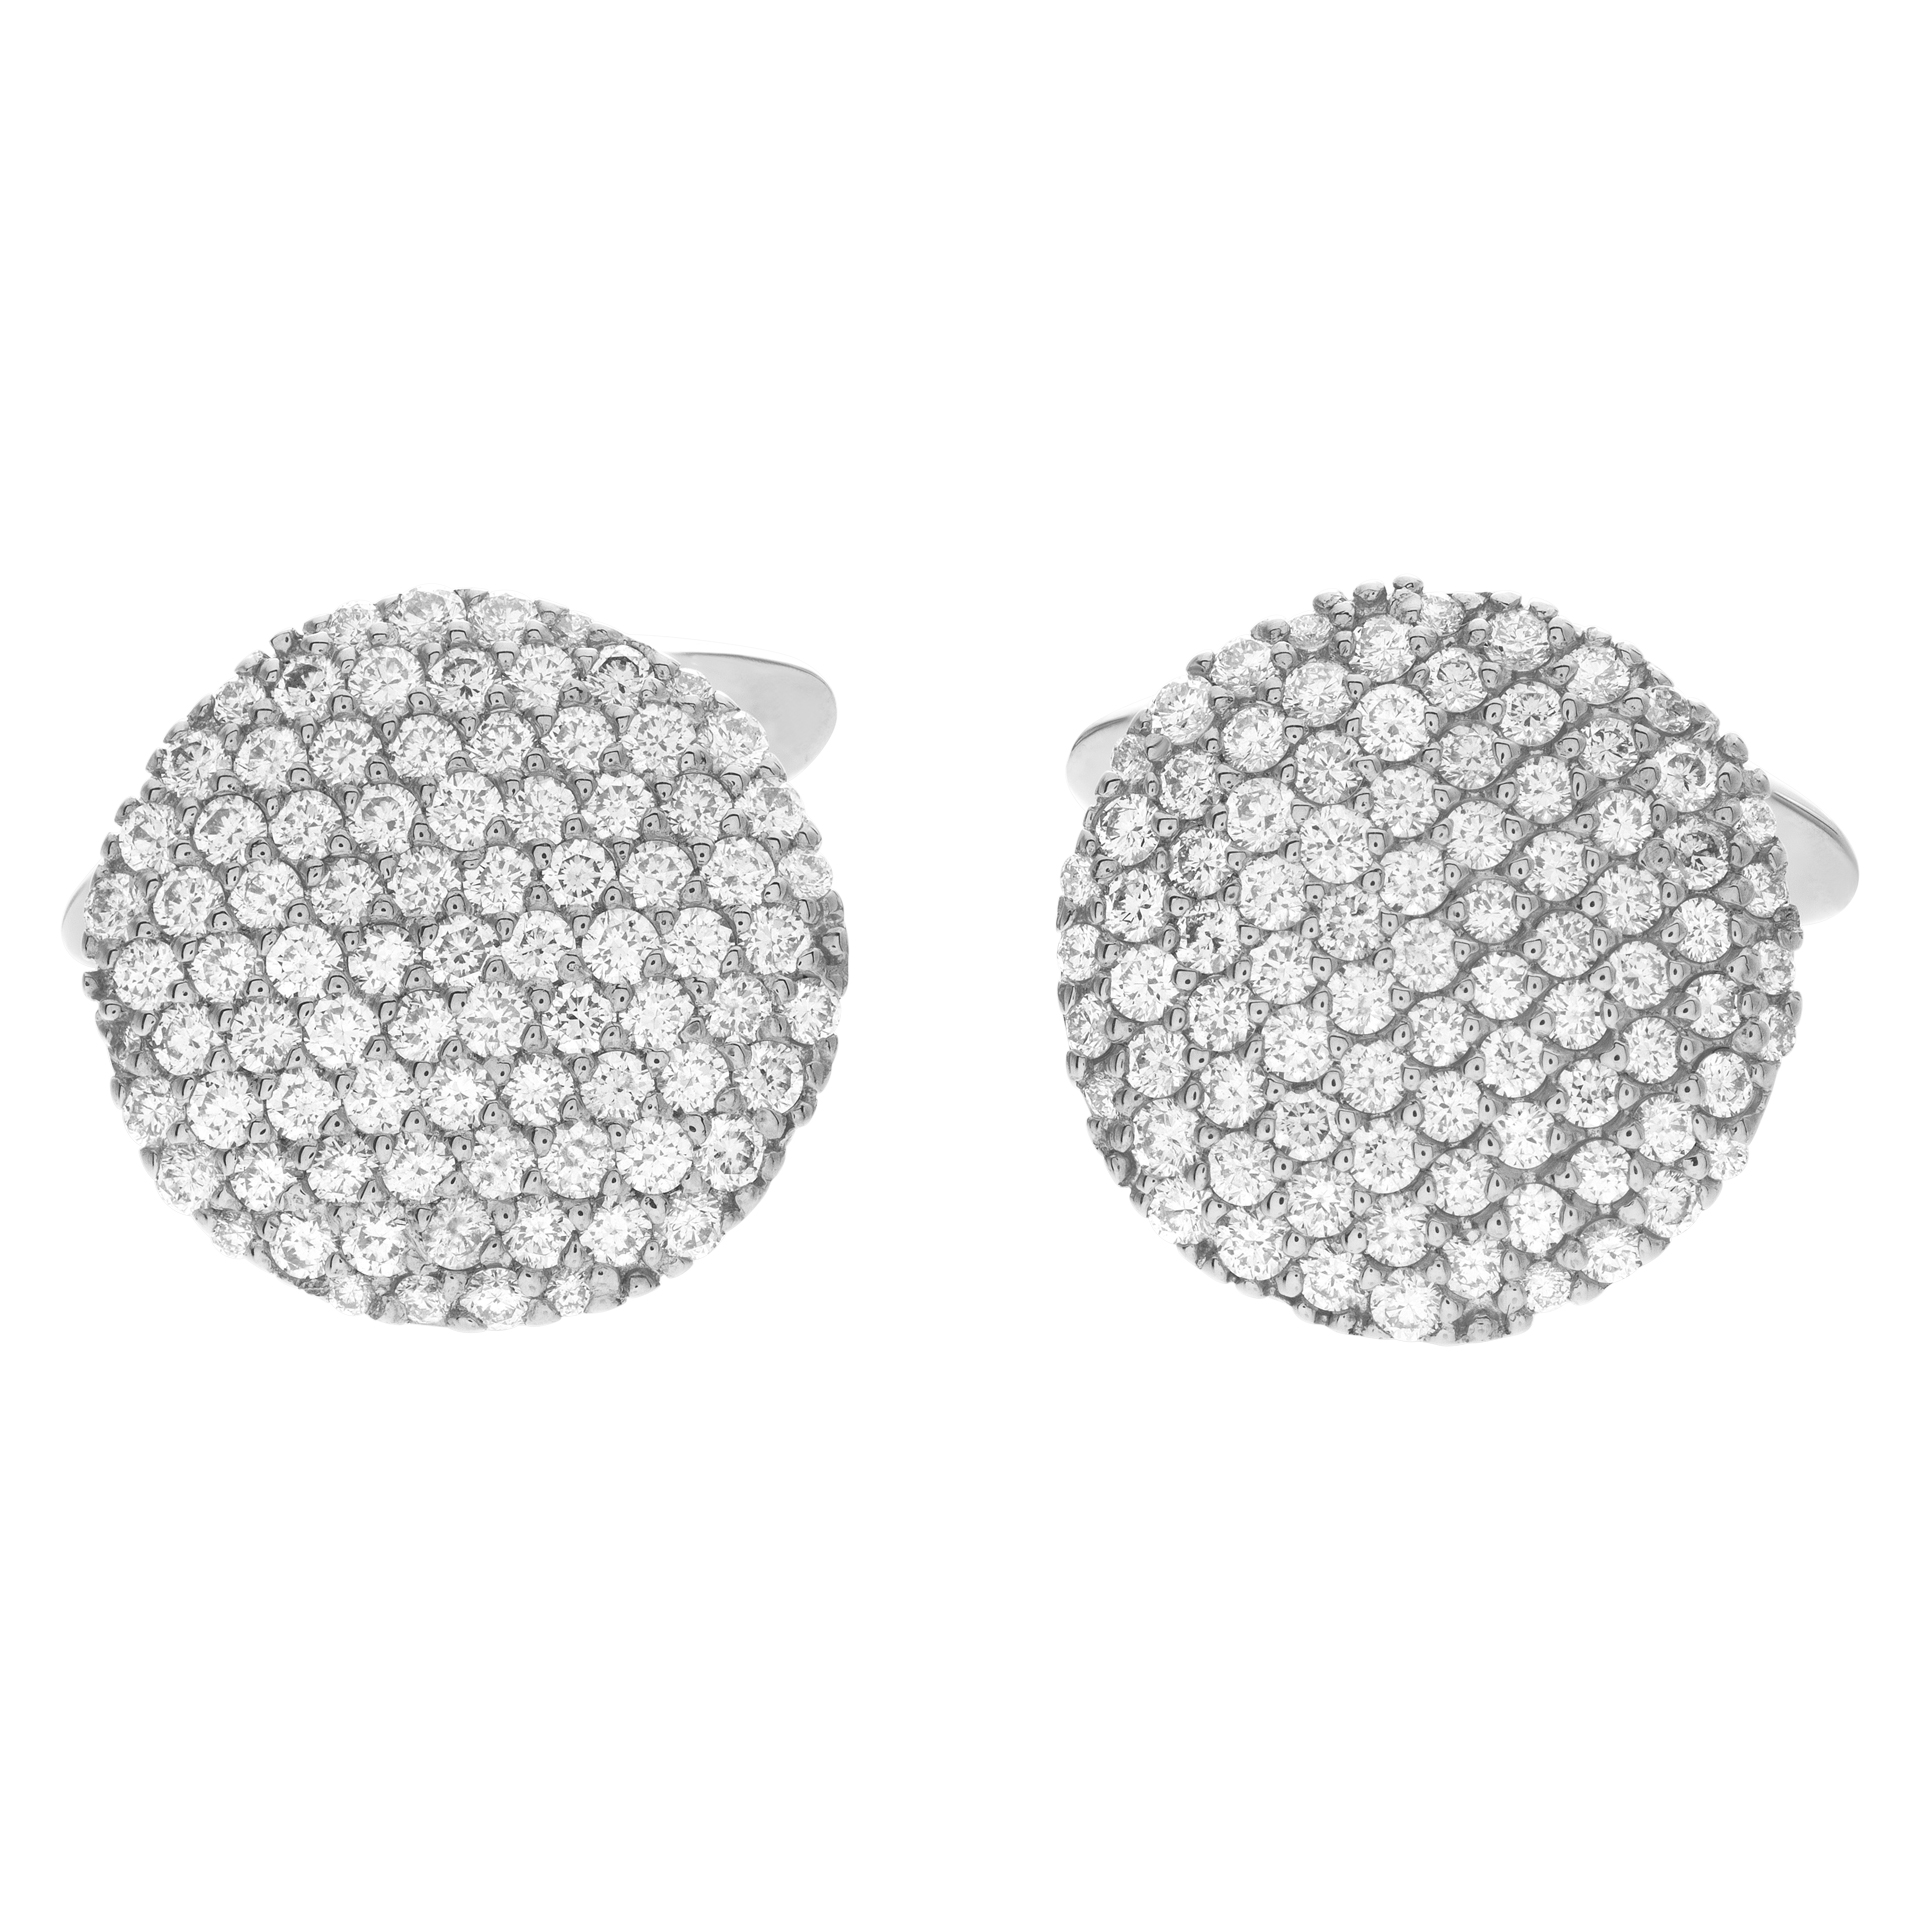 18k white gold pave set circle cufflinks with 2.5 carats in diamonds